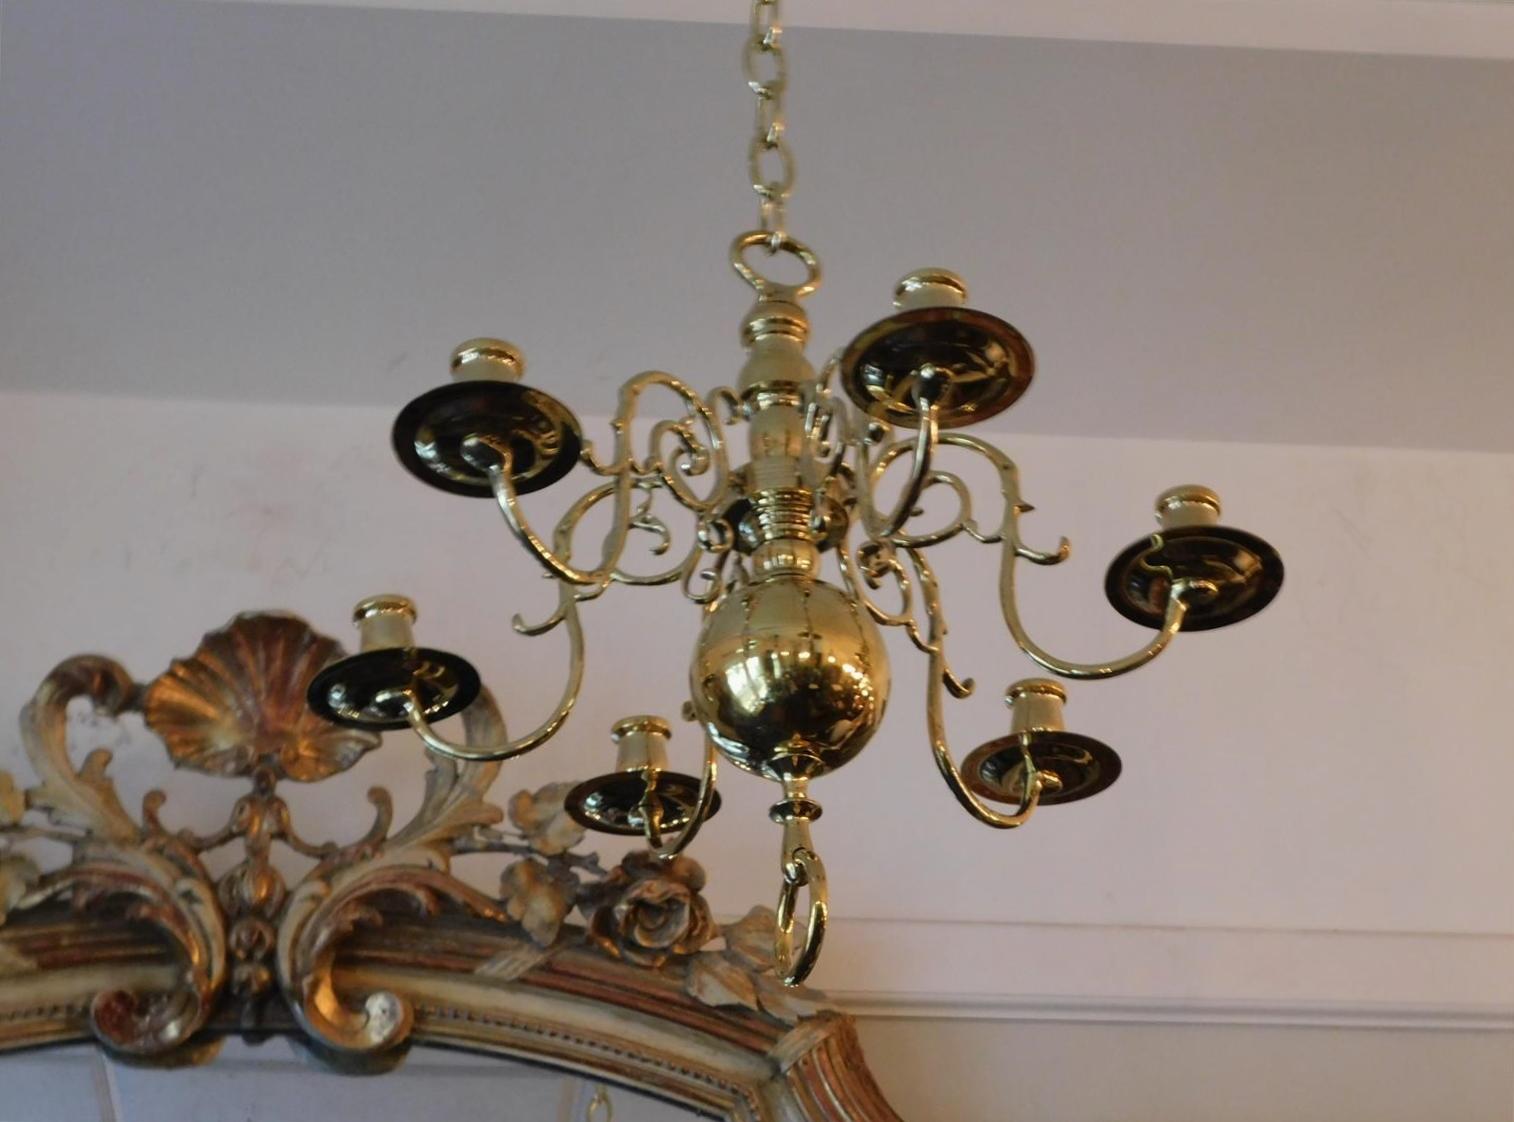 Dutch brass diminutive chandelier with six scrolled spur arms, central bulbous column, original bobeches with candle cups, and terminating on a ball finial with decorative ring. Chandelier is candle powered but can be electrified if desired at no